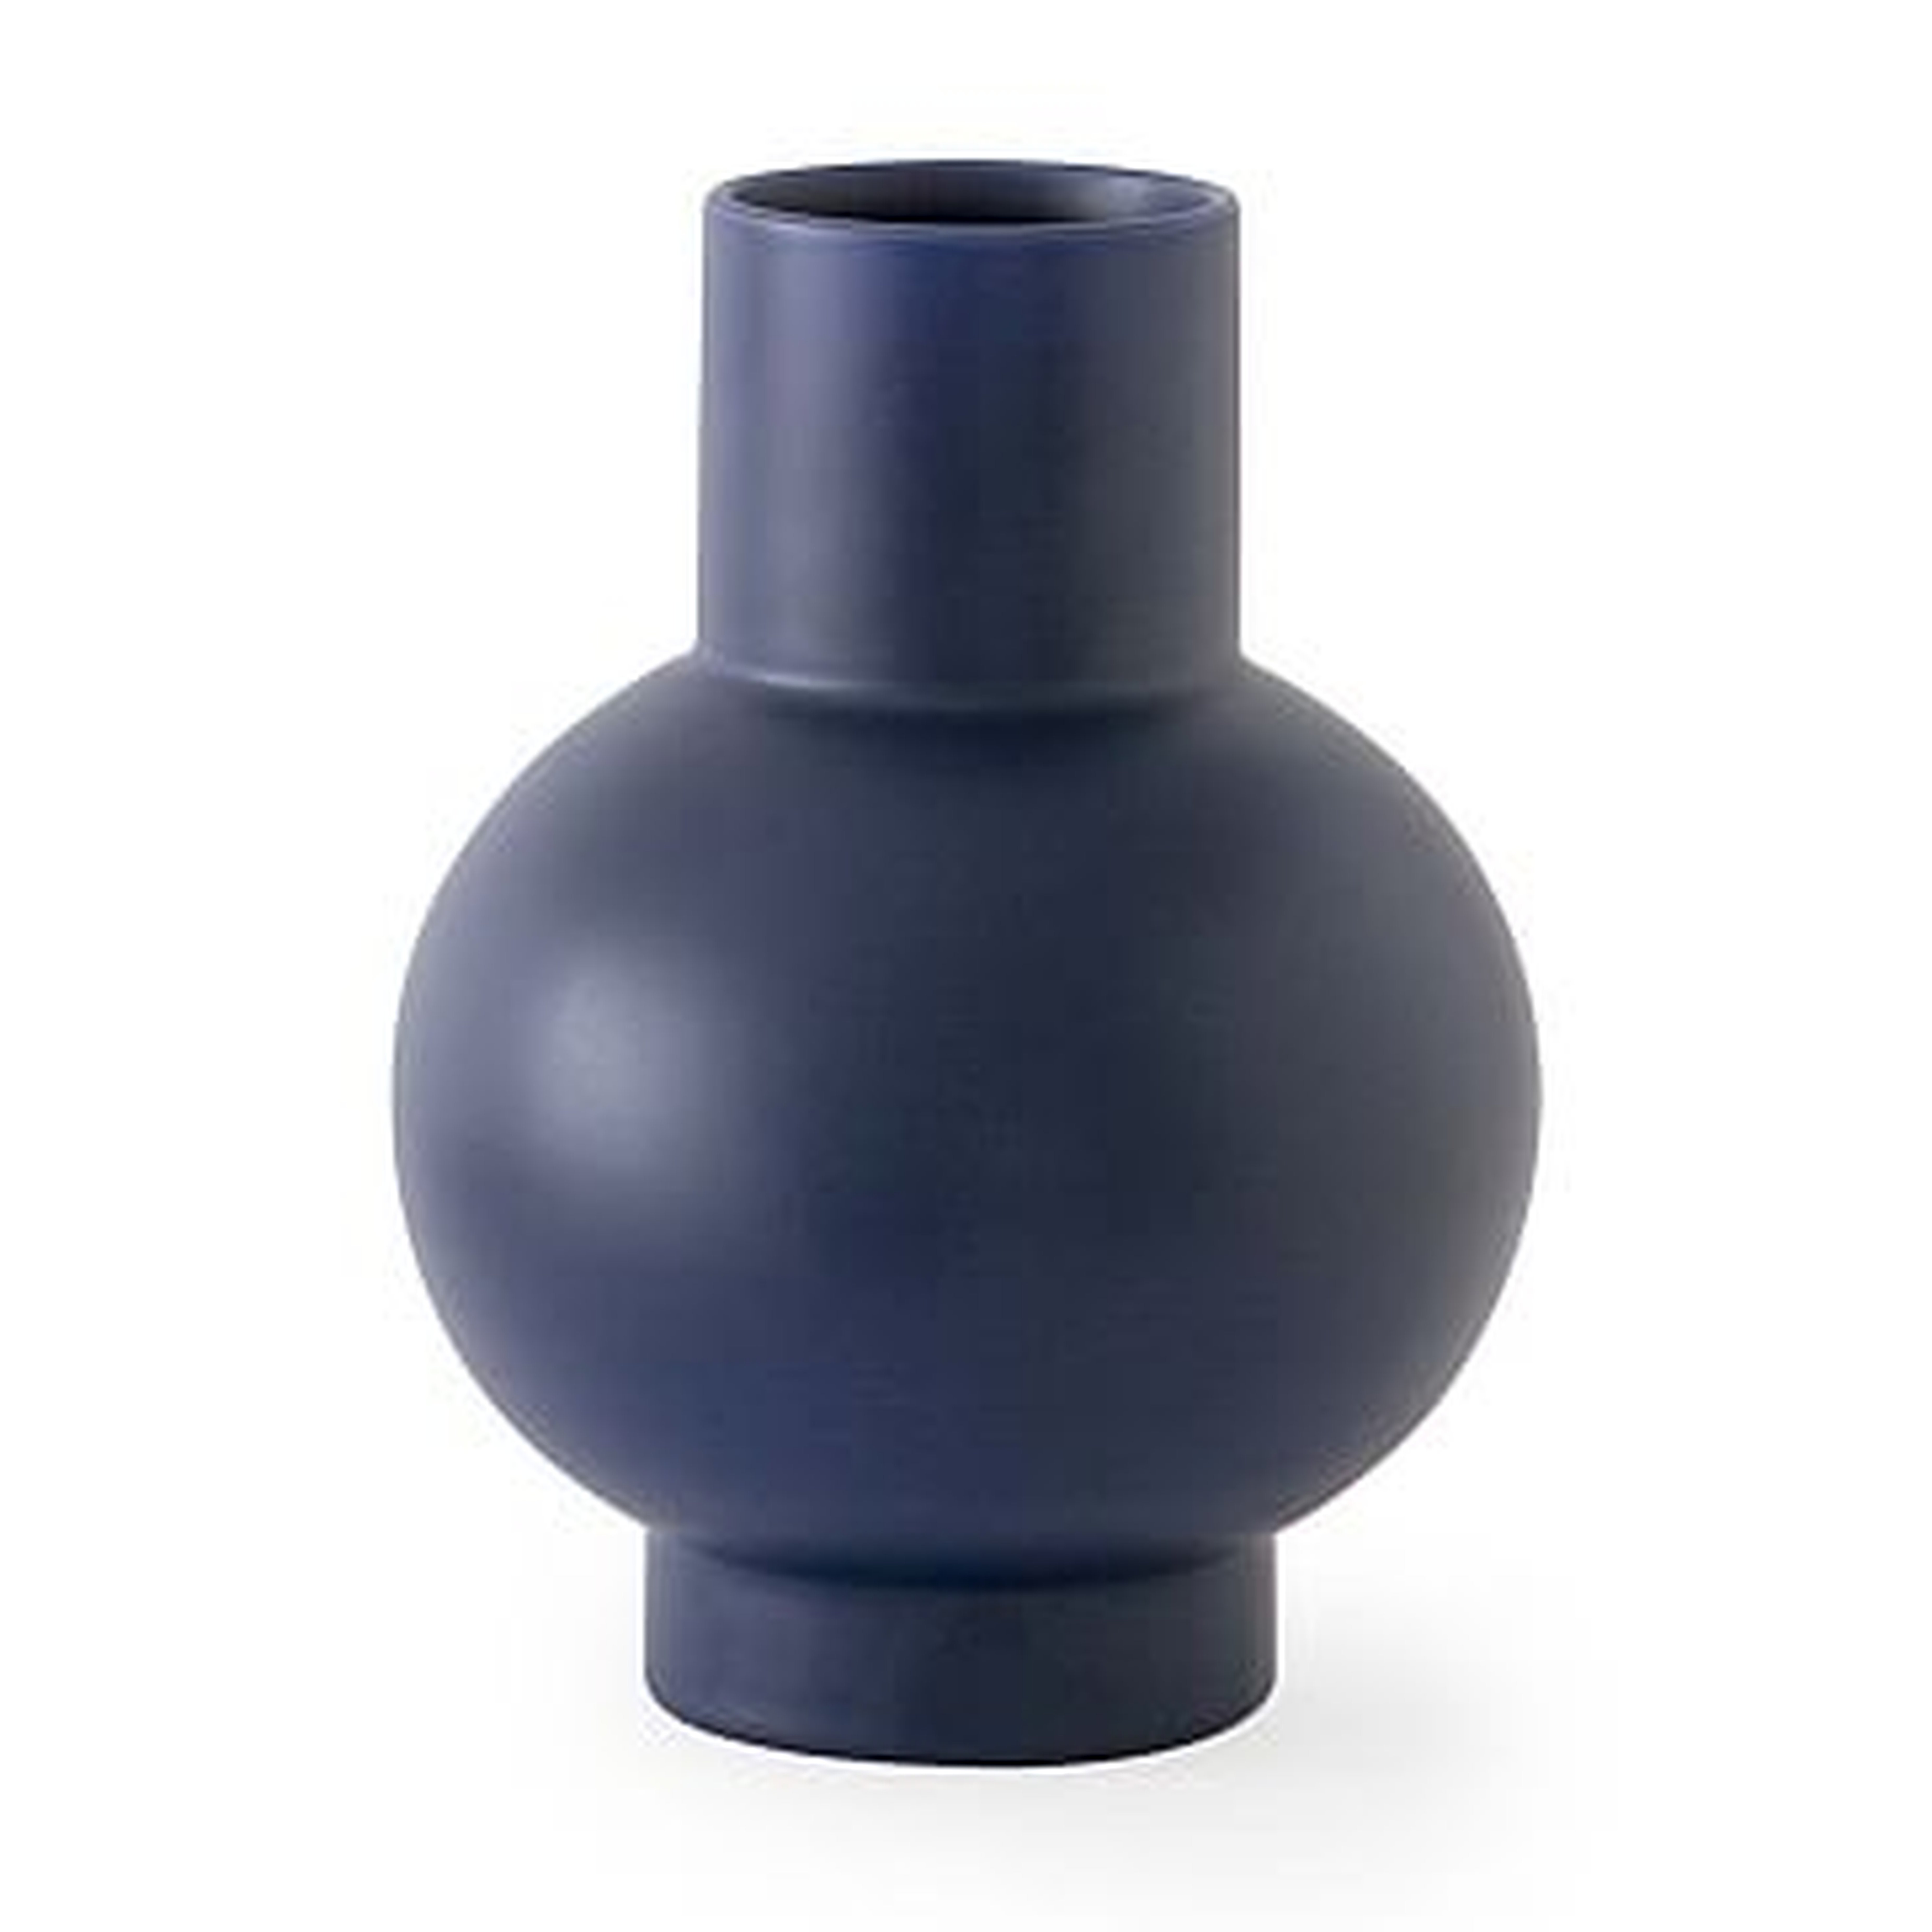 MoMA Collection Raawii Strom Vase Small, Ceramic, Blue - West Elm